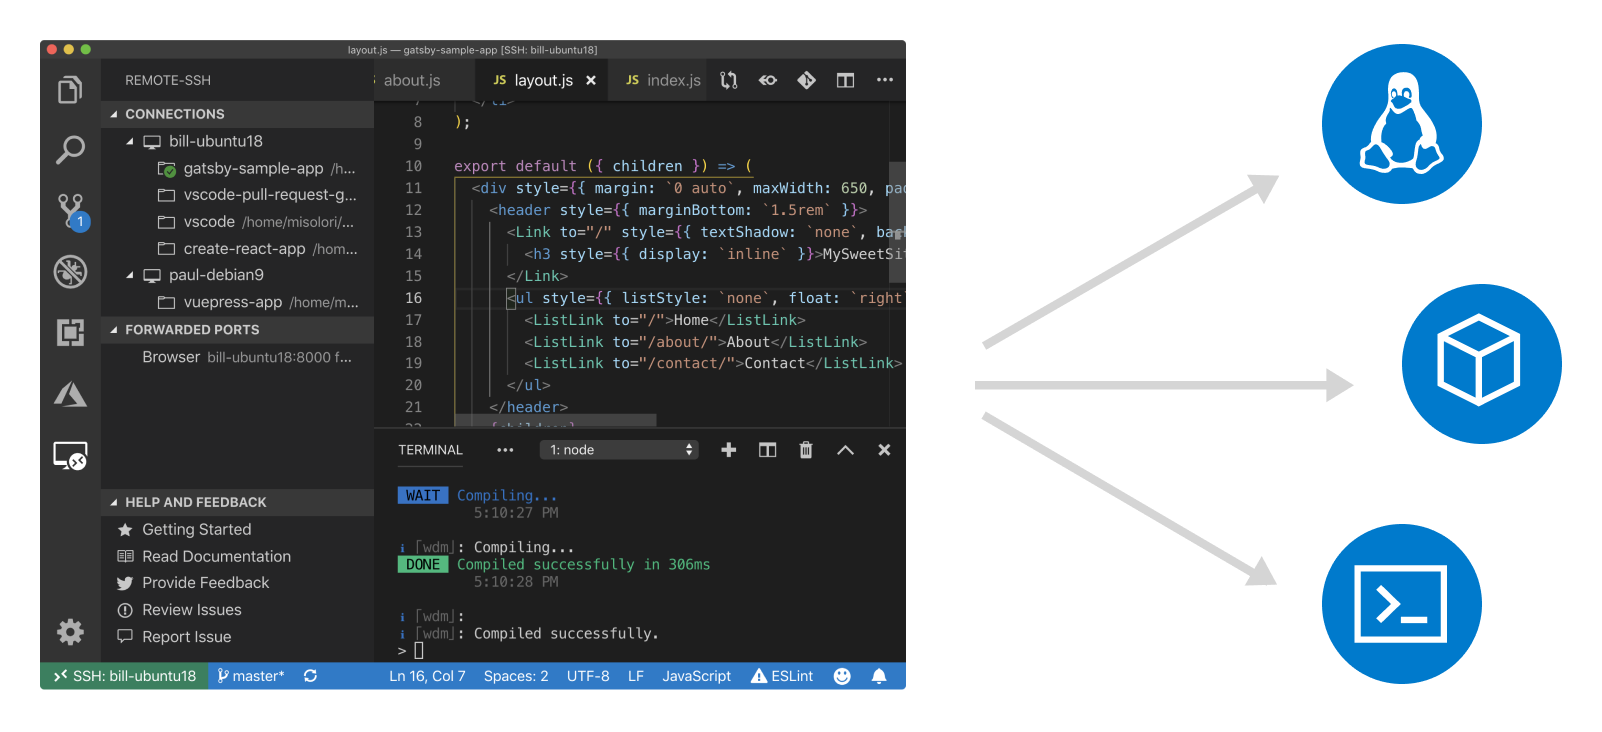 Visual Studio Code Remote Extensions for WSL, Containers, and SSH